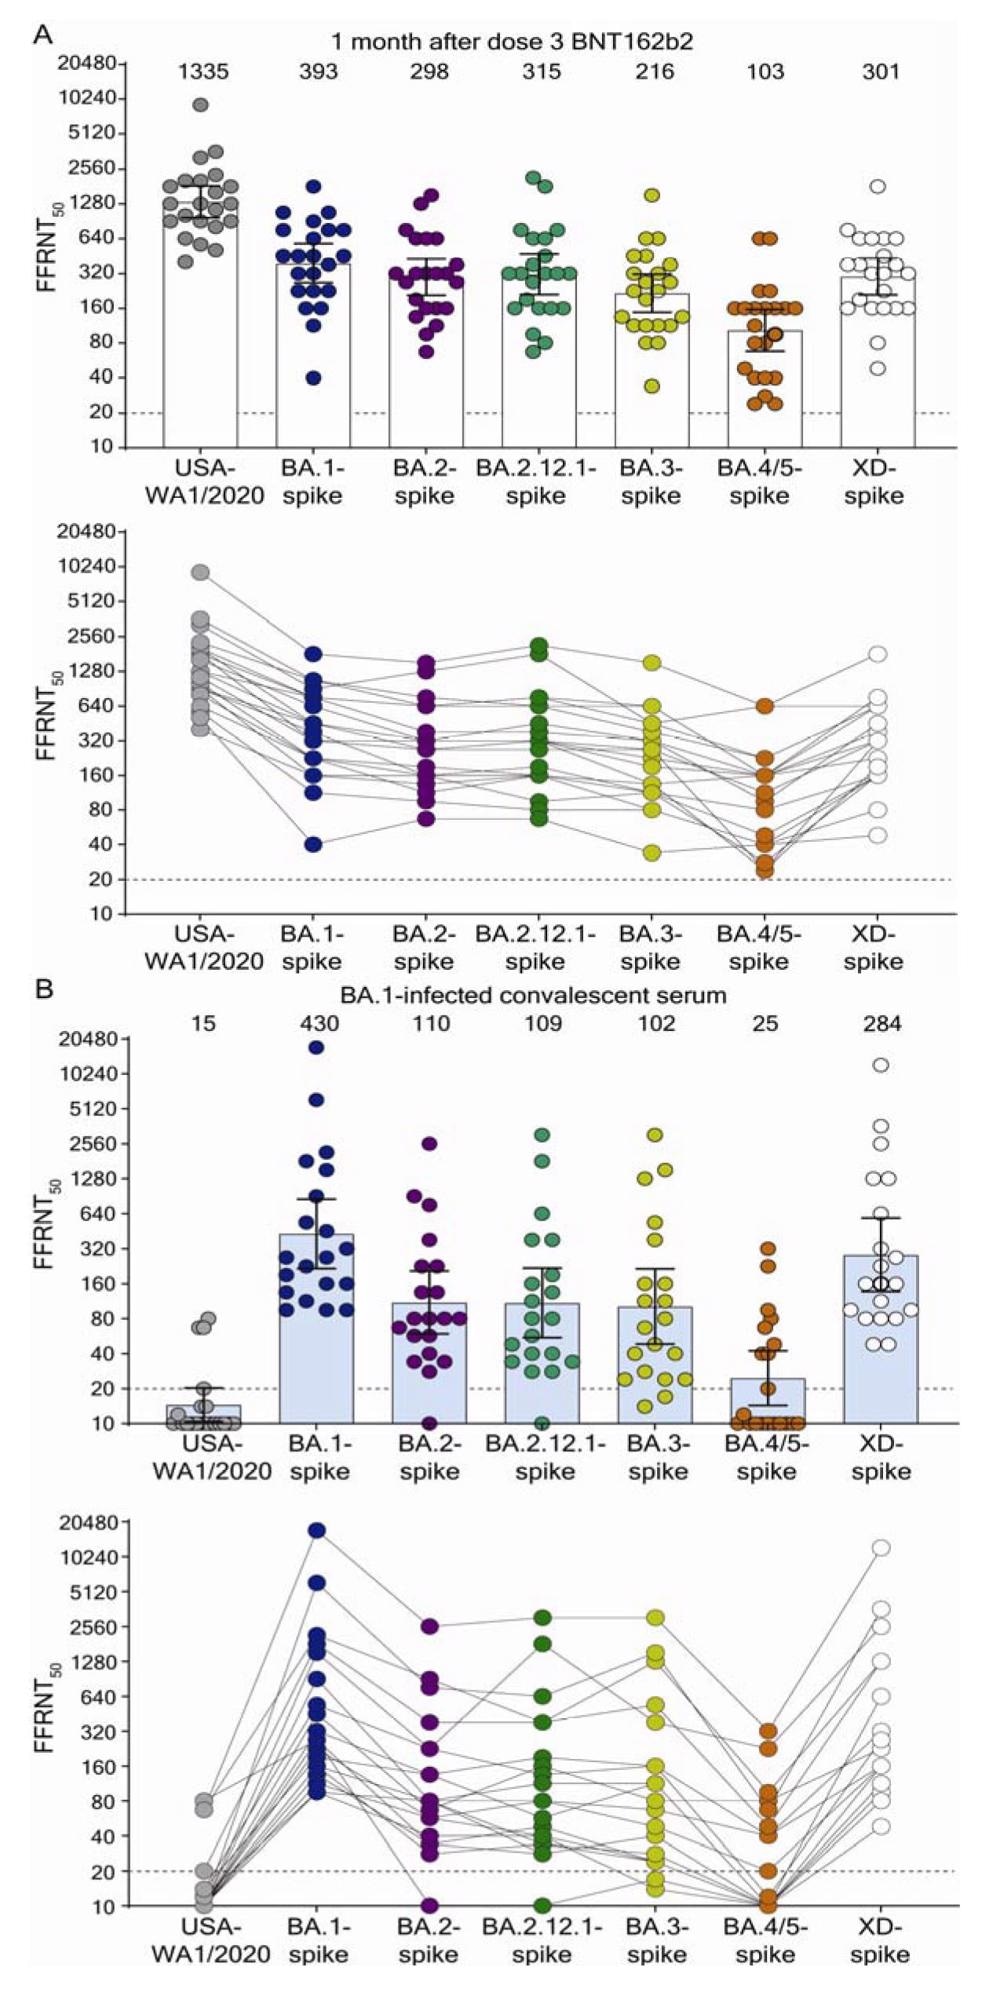 Neutralization by sera collected at 1-month post dose 3 BNT162b2 vaccine (A) and by sera collected from unvaccinated individuals who contracted Omicron BA.1 SARS-CoV-2 (B). Scatterplot of neutralization titers against USA-WA1/2020, Omicron sublineage BA.1-, BA.2-, BA.2.12.1-, BA.3-, BA.4/5-, and Deltacron XD-spike mNG SARS-CoV-2s. Both BNT162b2-vaccinated sera (n=22) and BA.1-infected convalescent sera (n=20) were tested for their FFRNT50s against the variant-spike mNG SARS-CoV-2s. The variant-spike mNG SARS-CoV-2s were produced by engineering the complete variant spike genes into the mNG USA-WA1/2020. Each data point represents the geometric mean FFRNT50 (GMT) obtained with a serum specimen against the indicated virus. Tables S1 and S2 summarize the serum information and FFRNT50s for (A) and (B), respectively. The neutralization titers for individual variant-spike mNG SARS-CoV-2s were determined in two or three independent experiments, each with duplicate assays; the GMTs are presented. The bar heights and the numbers above indicate GMTs. The whiskers indicate 95% confidence intervals. The dotted lines indicate the limit of detection of FFRNT50. Statistical analysis was performed with the use of the Wilcoxon matched-pairs signed-rank test. For the BNT162b2-vaccinated sera in (A), the P values of the GMT differences between USA-WA1/2020 and any variant-spike SARS-CoV-2 are all < 0.0001. For the BA.1-convelescent sera in (B), the P value of GMT difference between BA.1- and XD-spike viruses is 0.0021; the P values of the GMT differences between BA.1- and any other variant-spike viruses (including USA-WA1/2020) are all <0.0001. For both serum panels in (A) and (B), FFRNT50 values with connected lines are presented for individual sera.